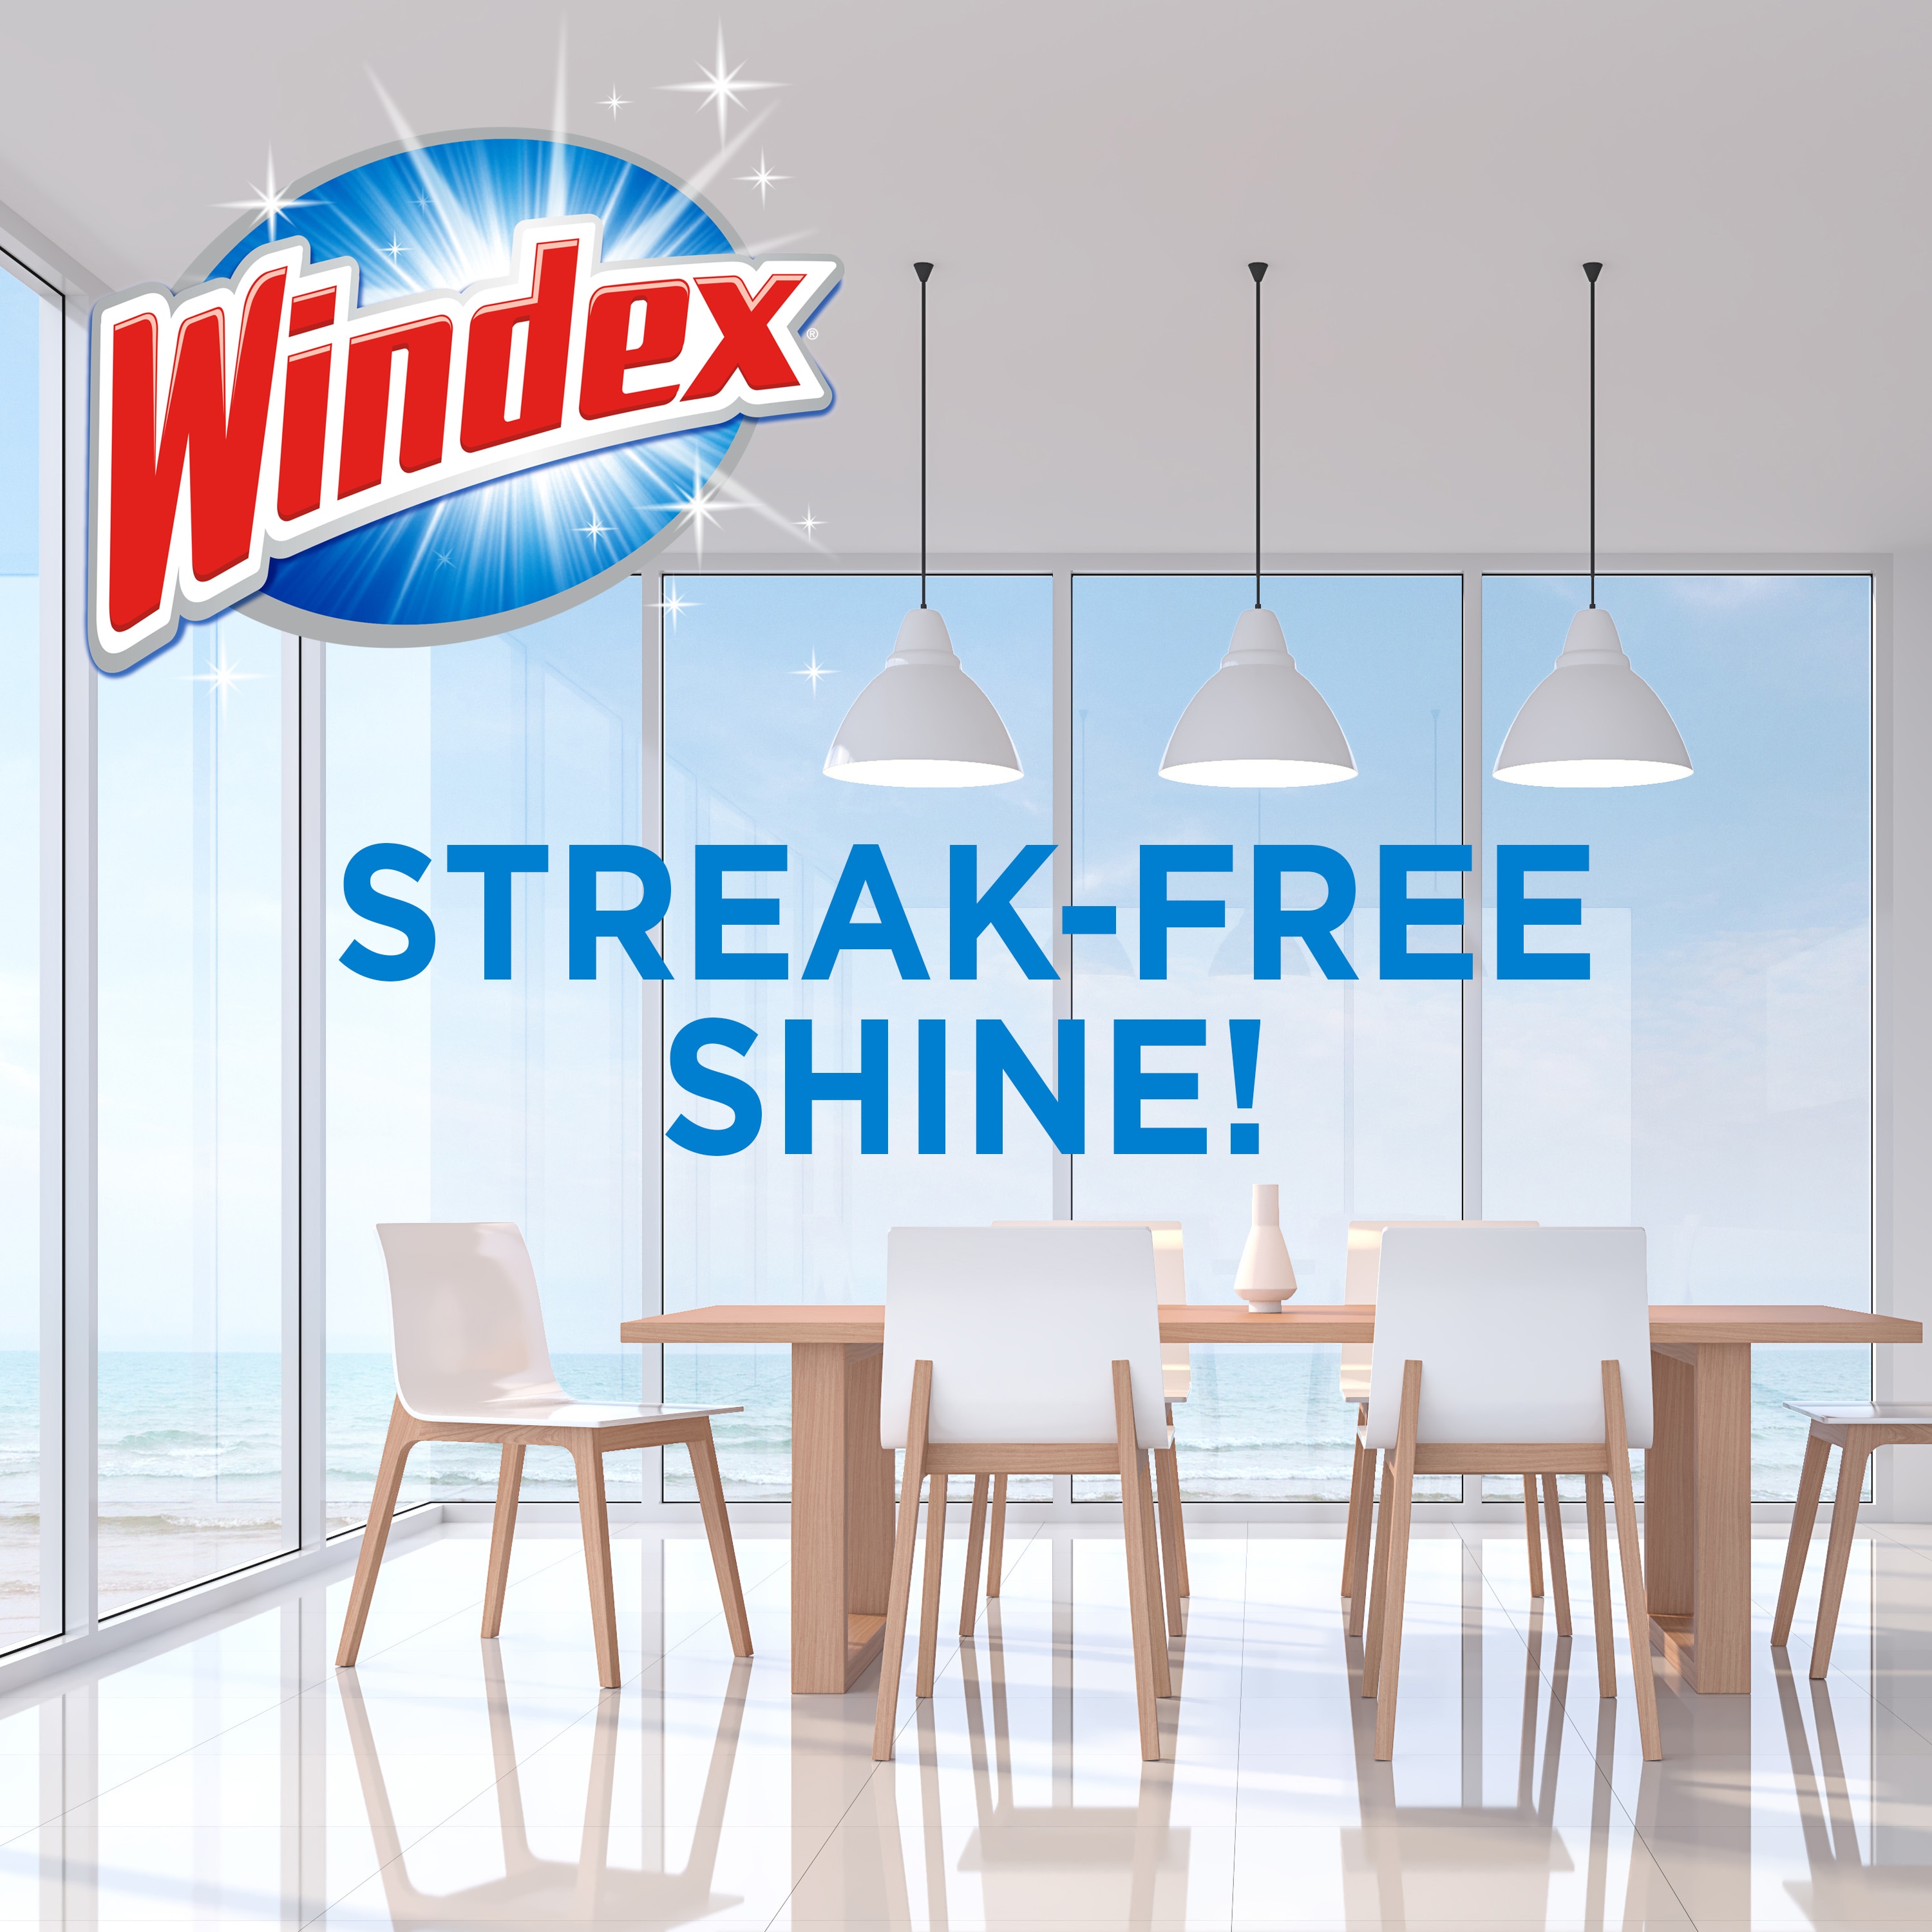 Windex 38-Count Wipes Glass Cleaner in the Glass Cleaners department at